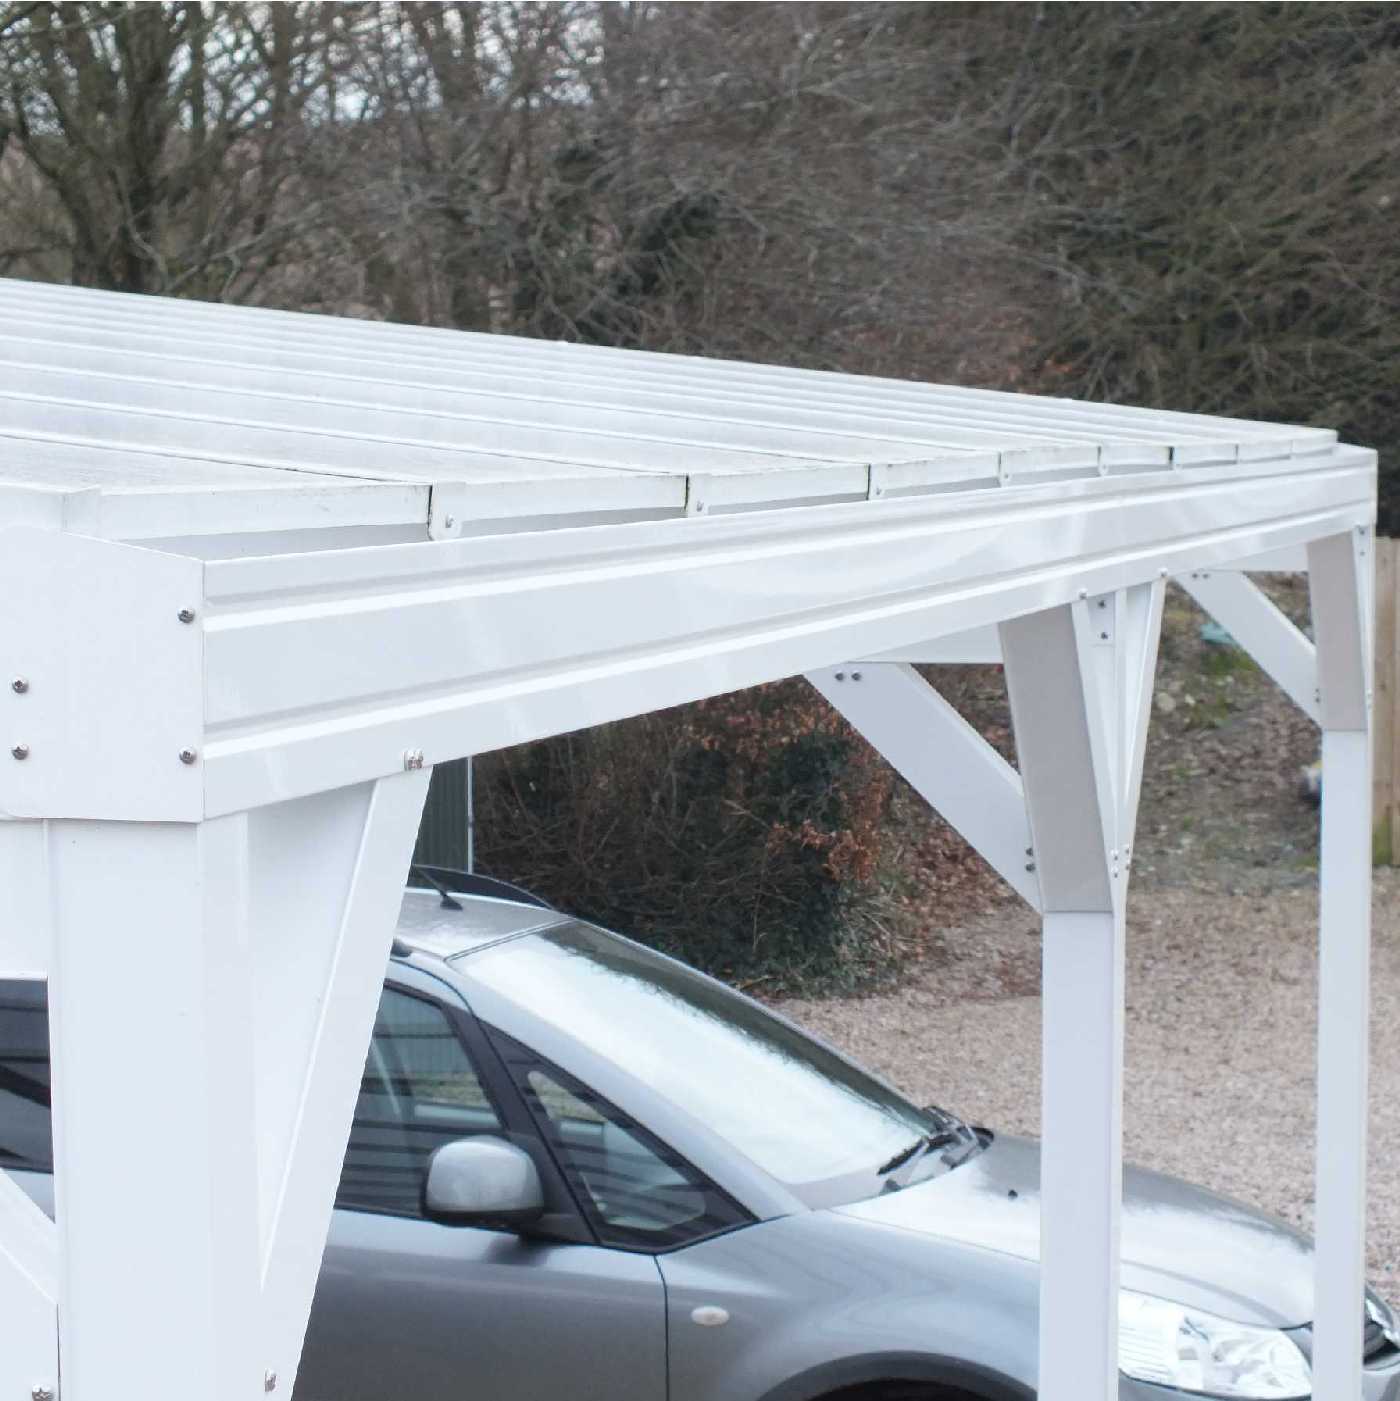 Omega Smart Free-Standing, White MonoPitch Roof Canopy with 16mm Polycarbonate Glazing - 4.9m (W) x 3.5m (P), (6) Supporting Posts from Omega Build